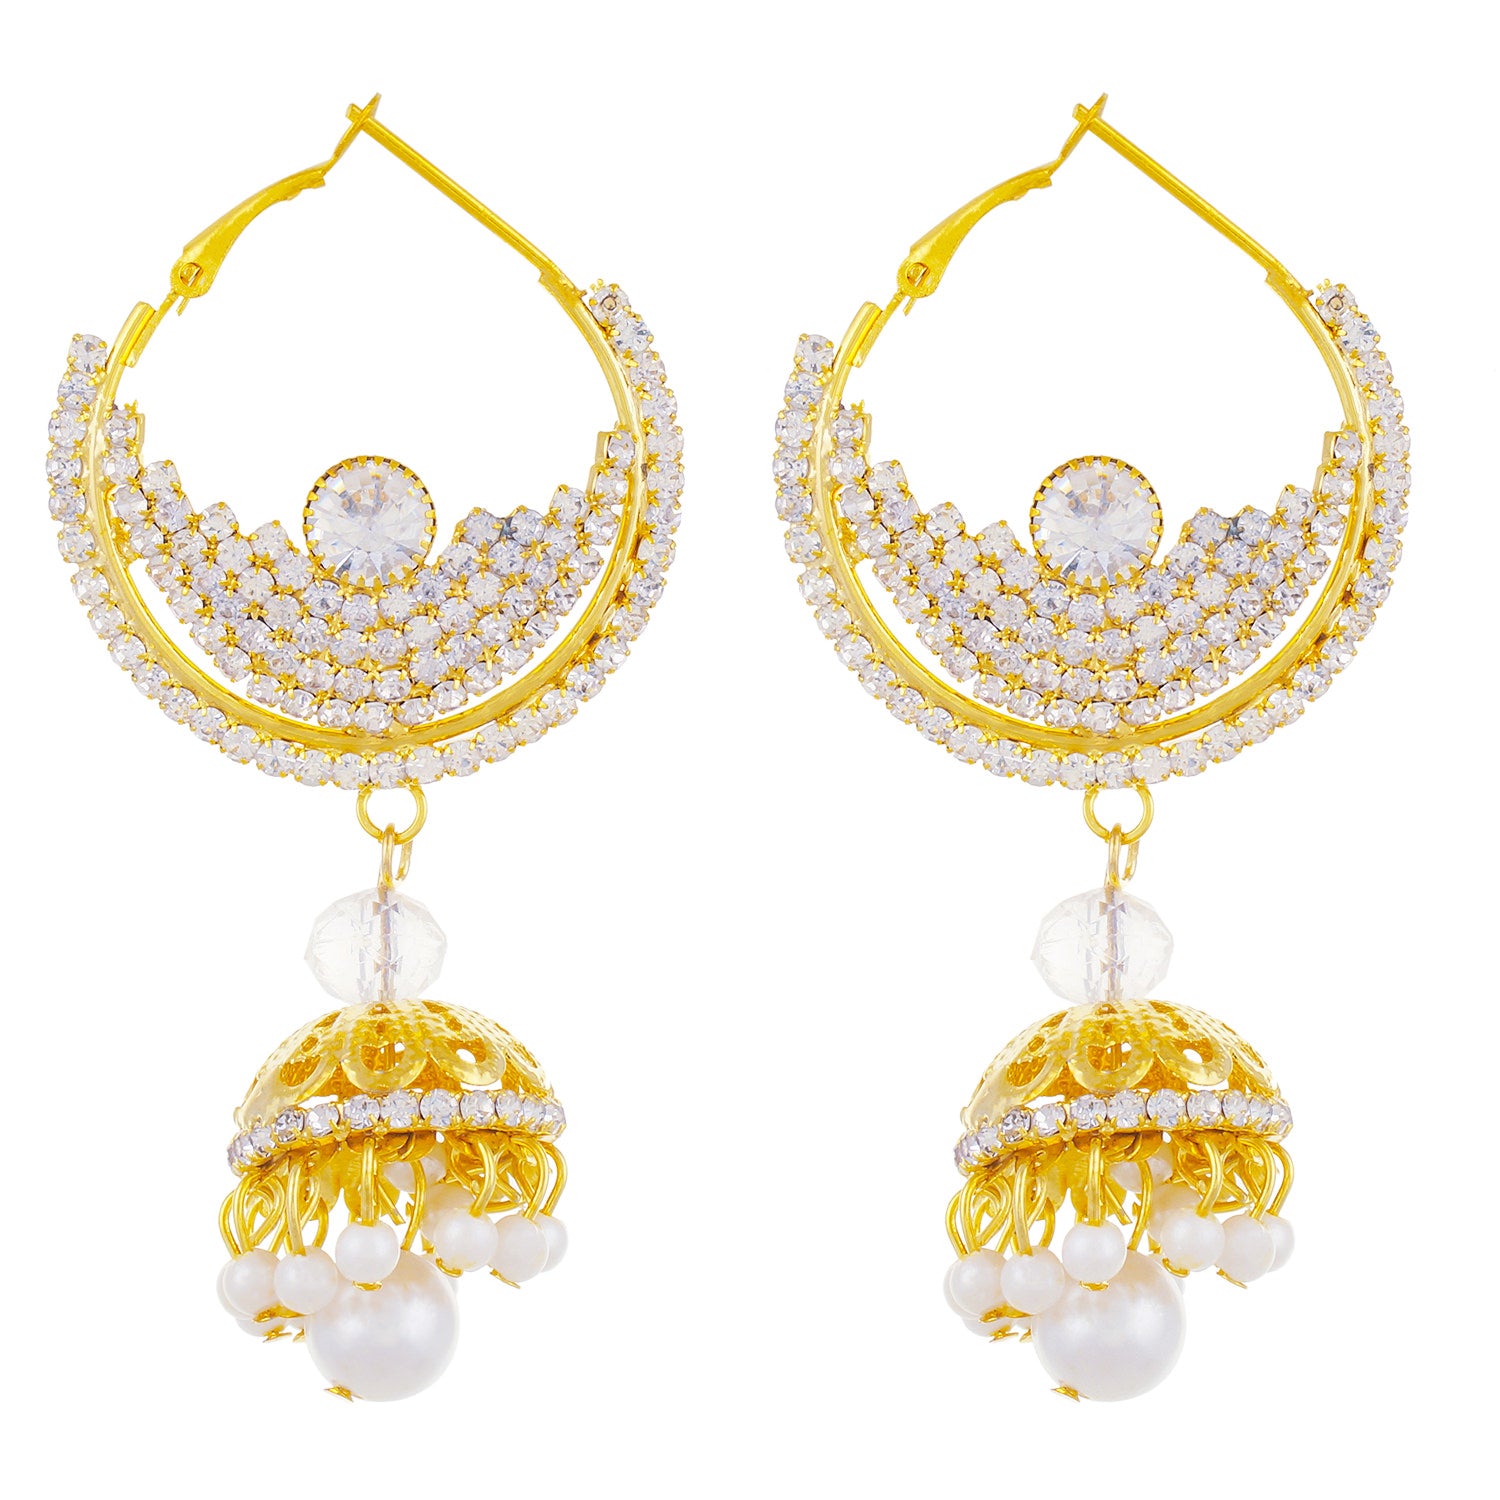 Gold plated Alloy Chandbali Jhumki Earrings Fashion Imitaion Jewelry for Girls and Women